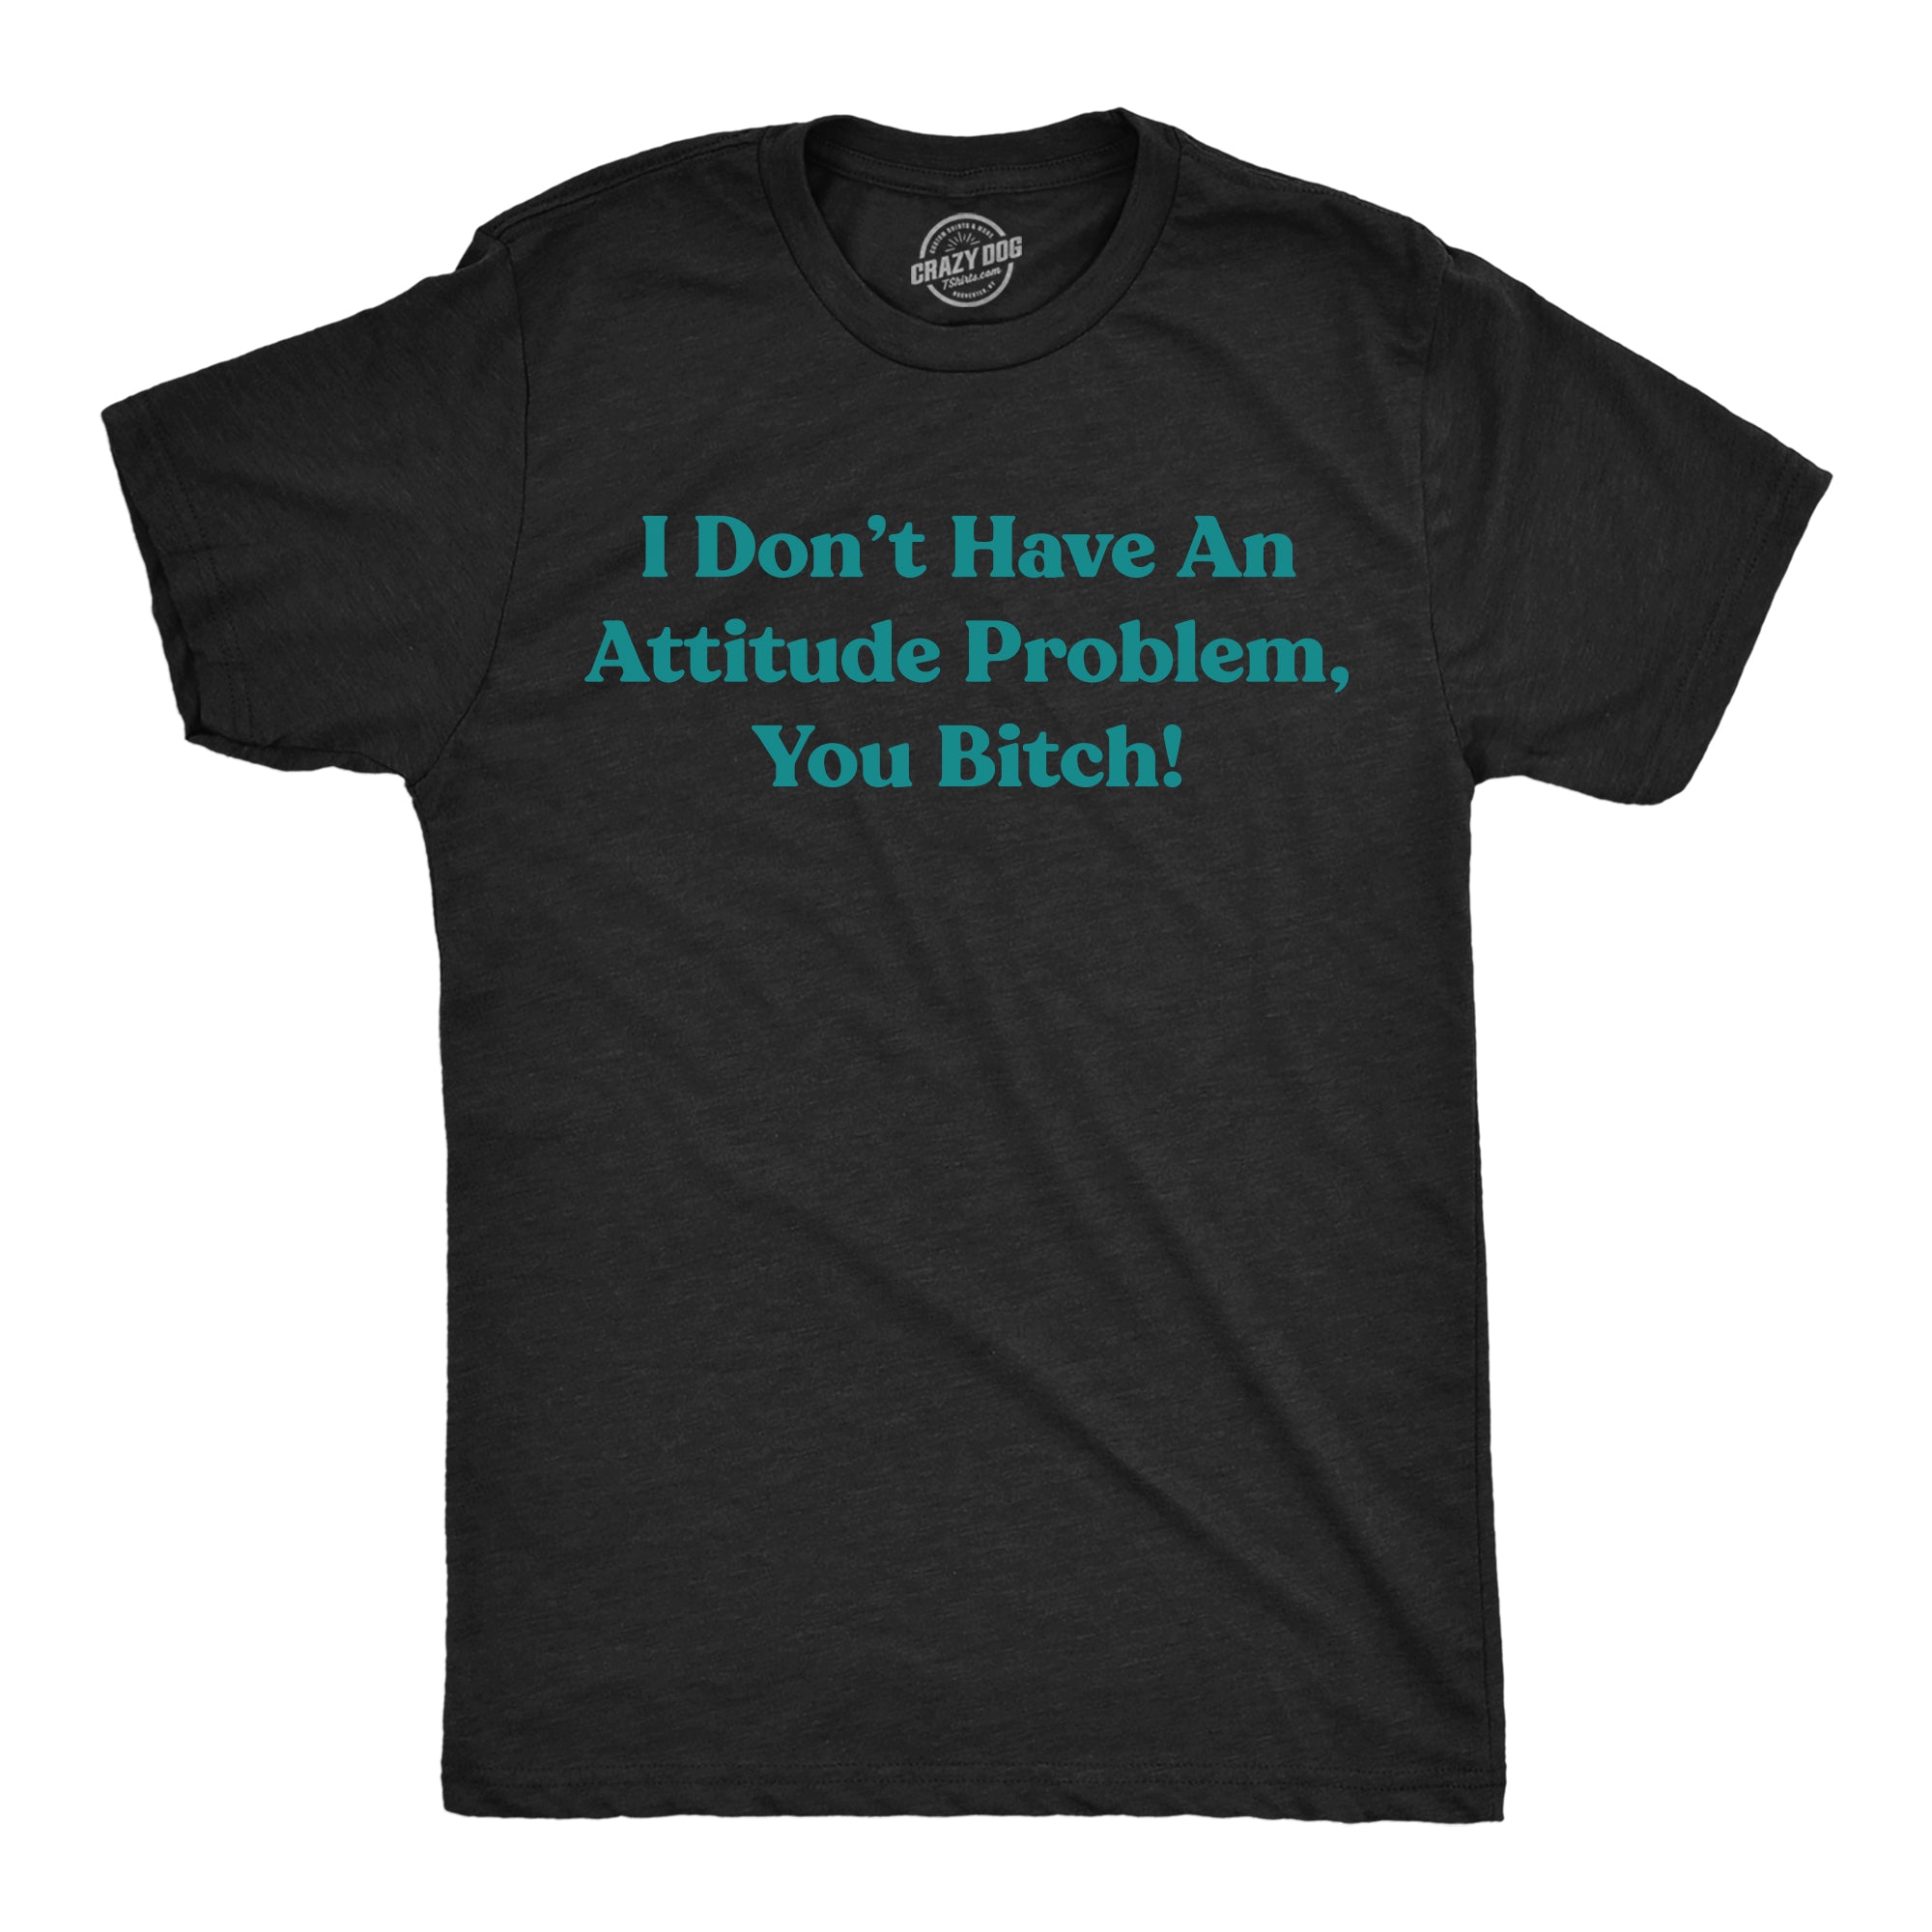 Funny Heather Black - I Dont Have An Attitude Problem You Bitch I Dont Have An Attitude Problem You Bitch Mens T Shirt Nerdy sarcastic Tee